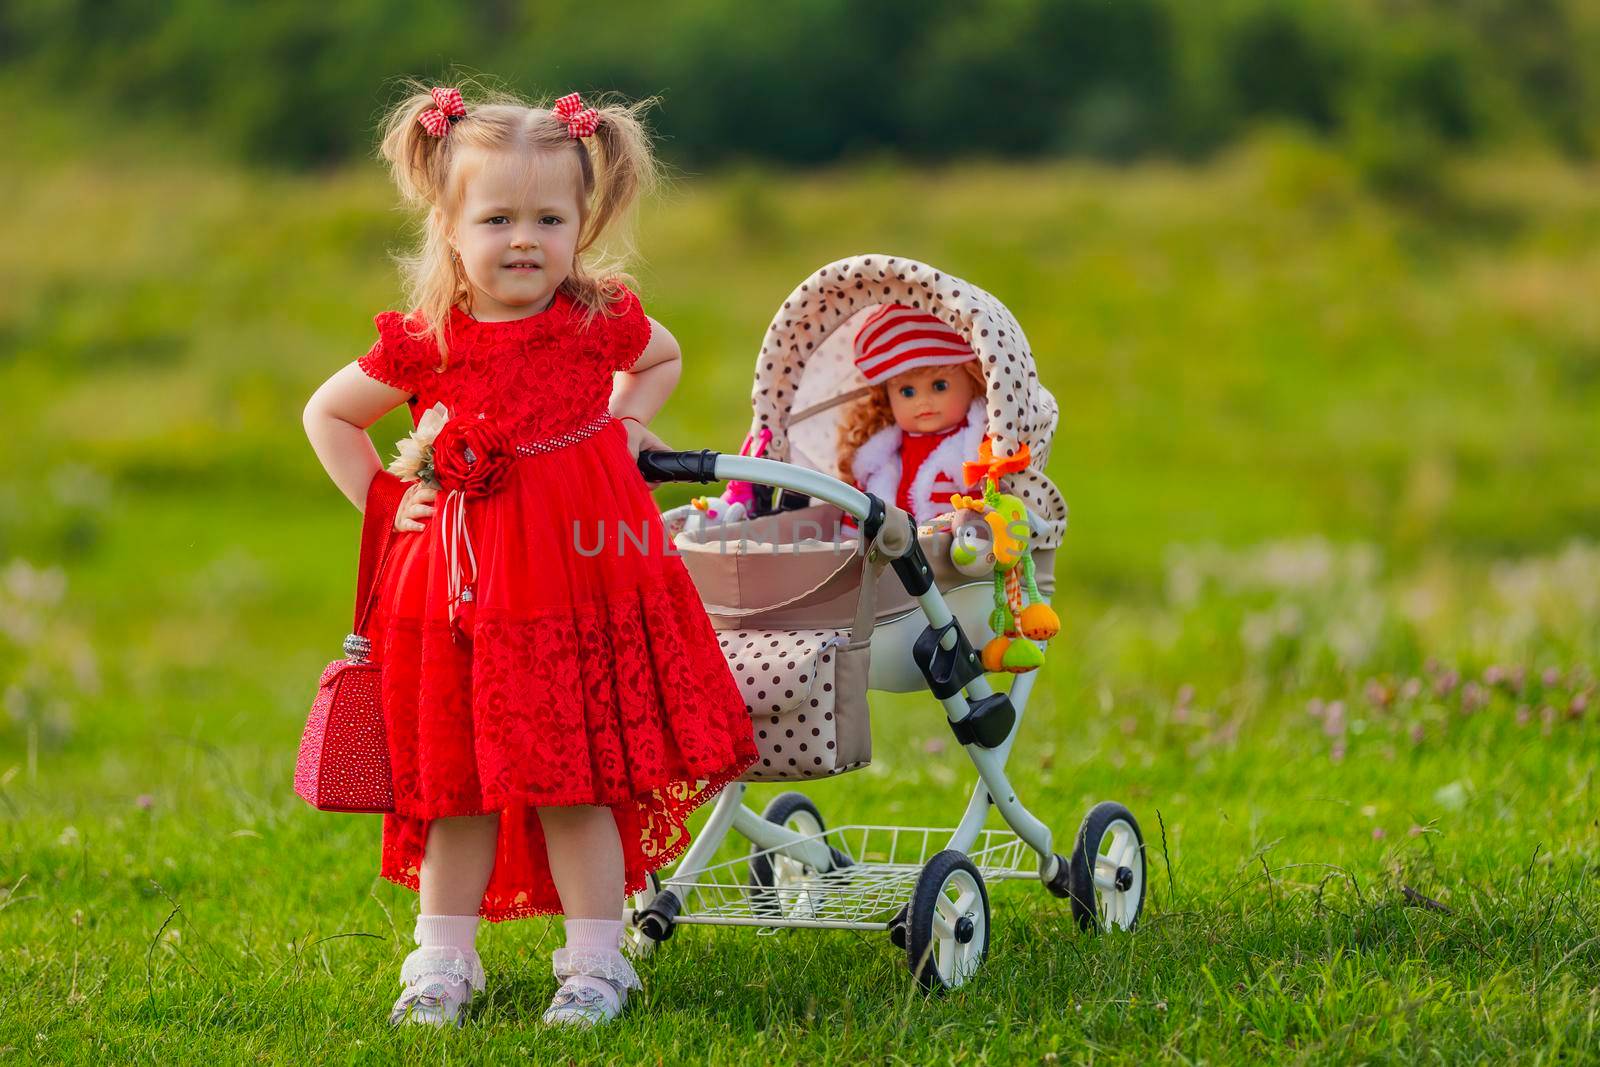 girl playing with a doll in a stroller in nature